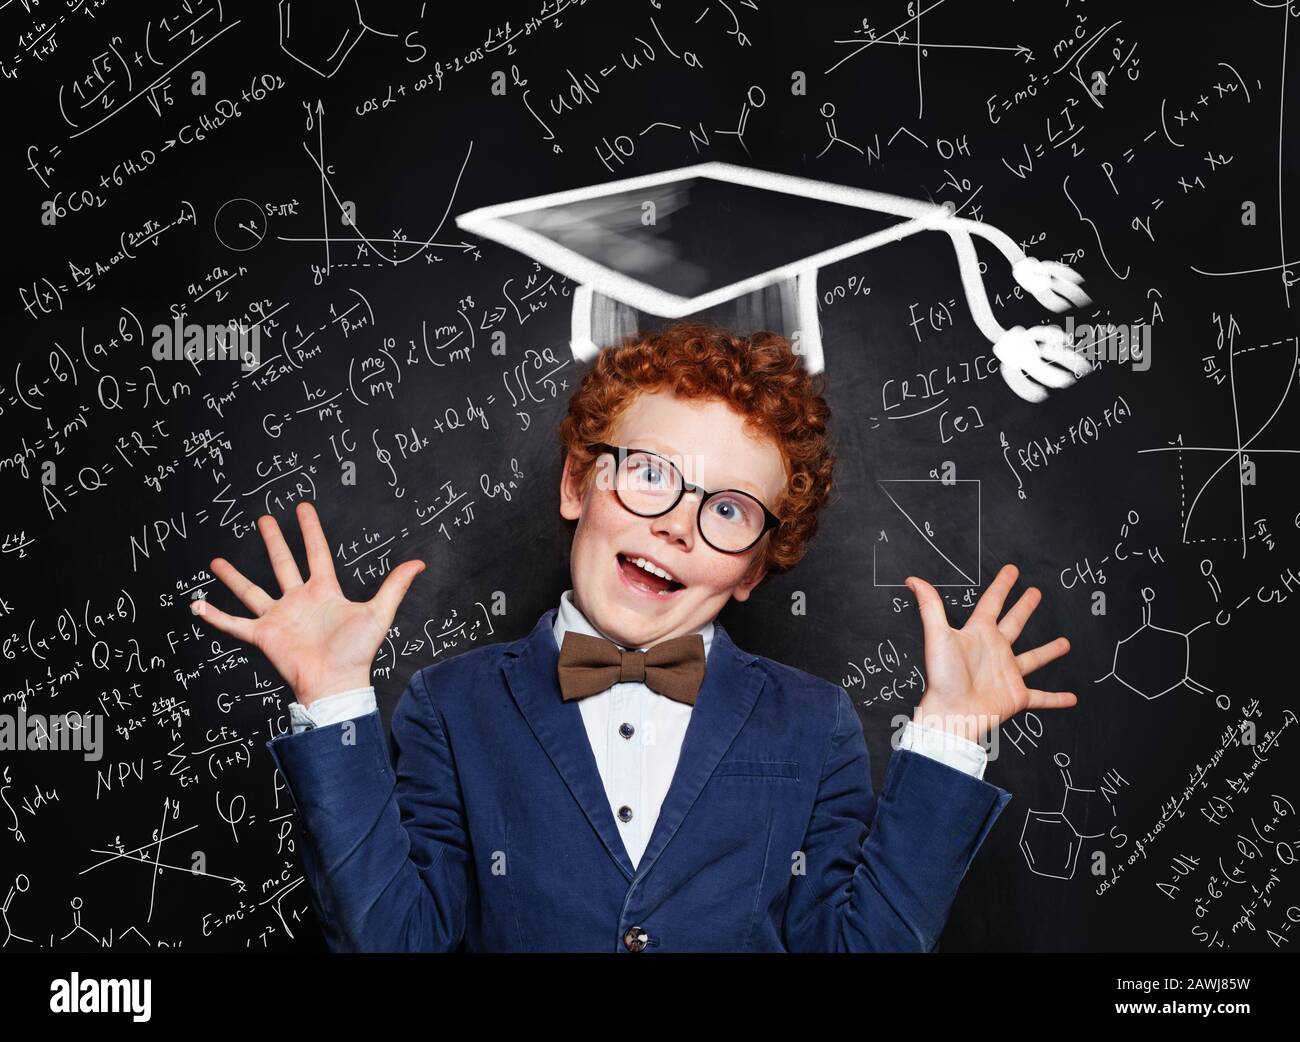 Funny kid with red hair, glasses and graduation hat against science background Stock Photo